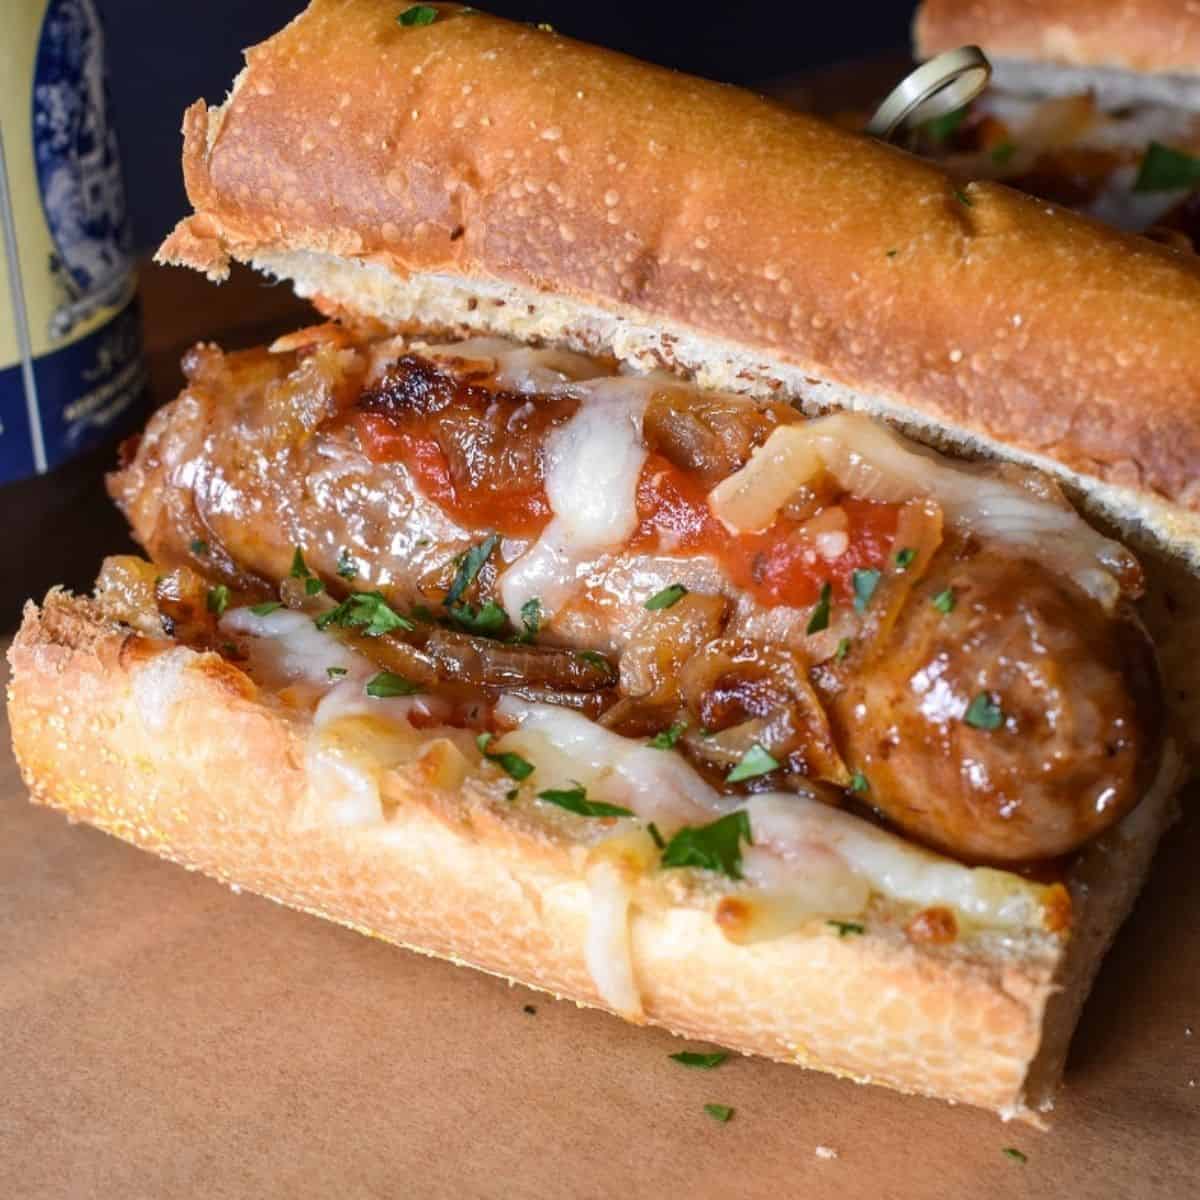 A close up image of an Italian sausage sandwich, served on a wood cutting board lined with brown parchment paper.